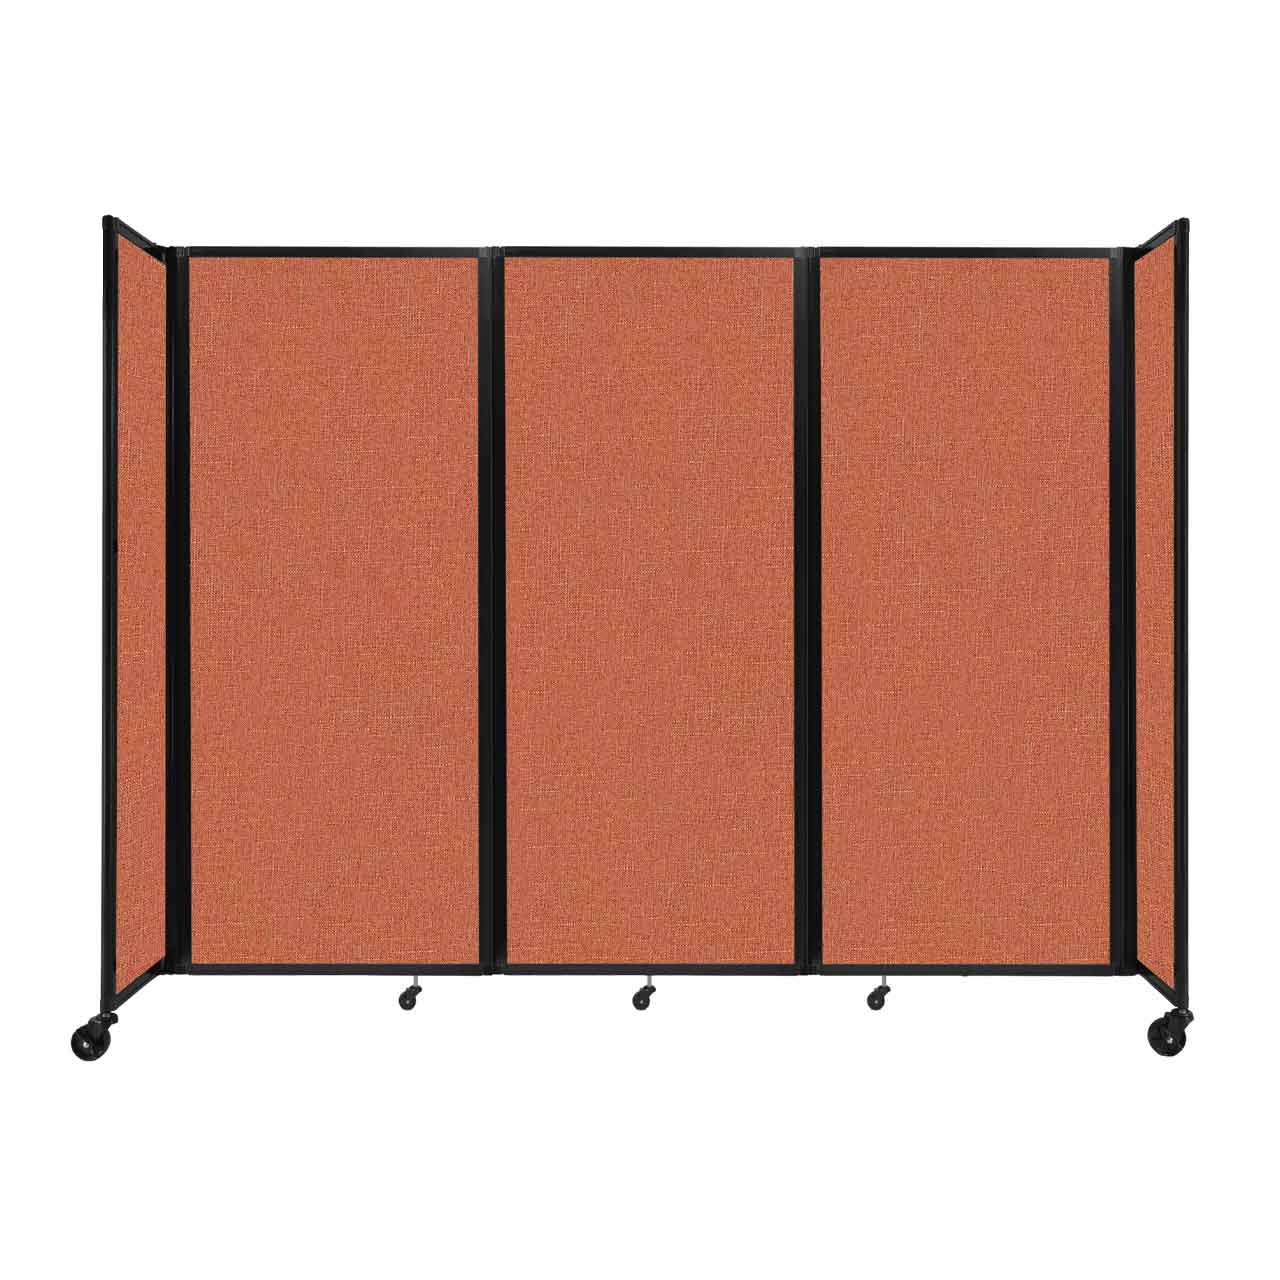 Room Divider 360° Folding Portable Partition with Acoustical Fabric Panels, 8' 6" W x 6' 10" H